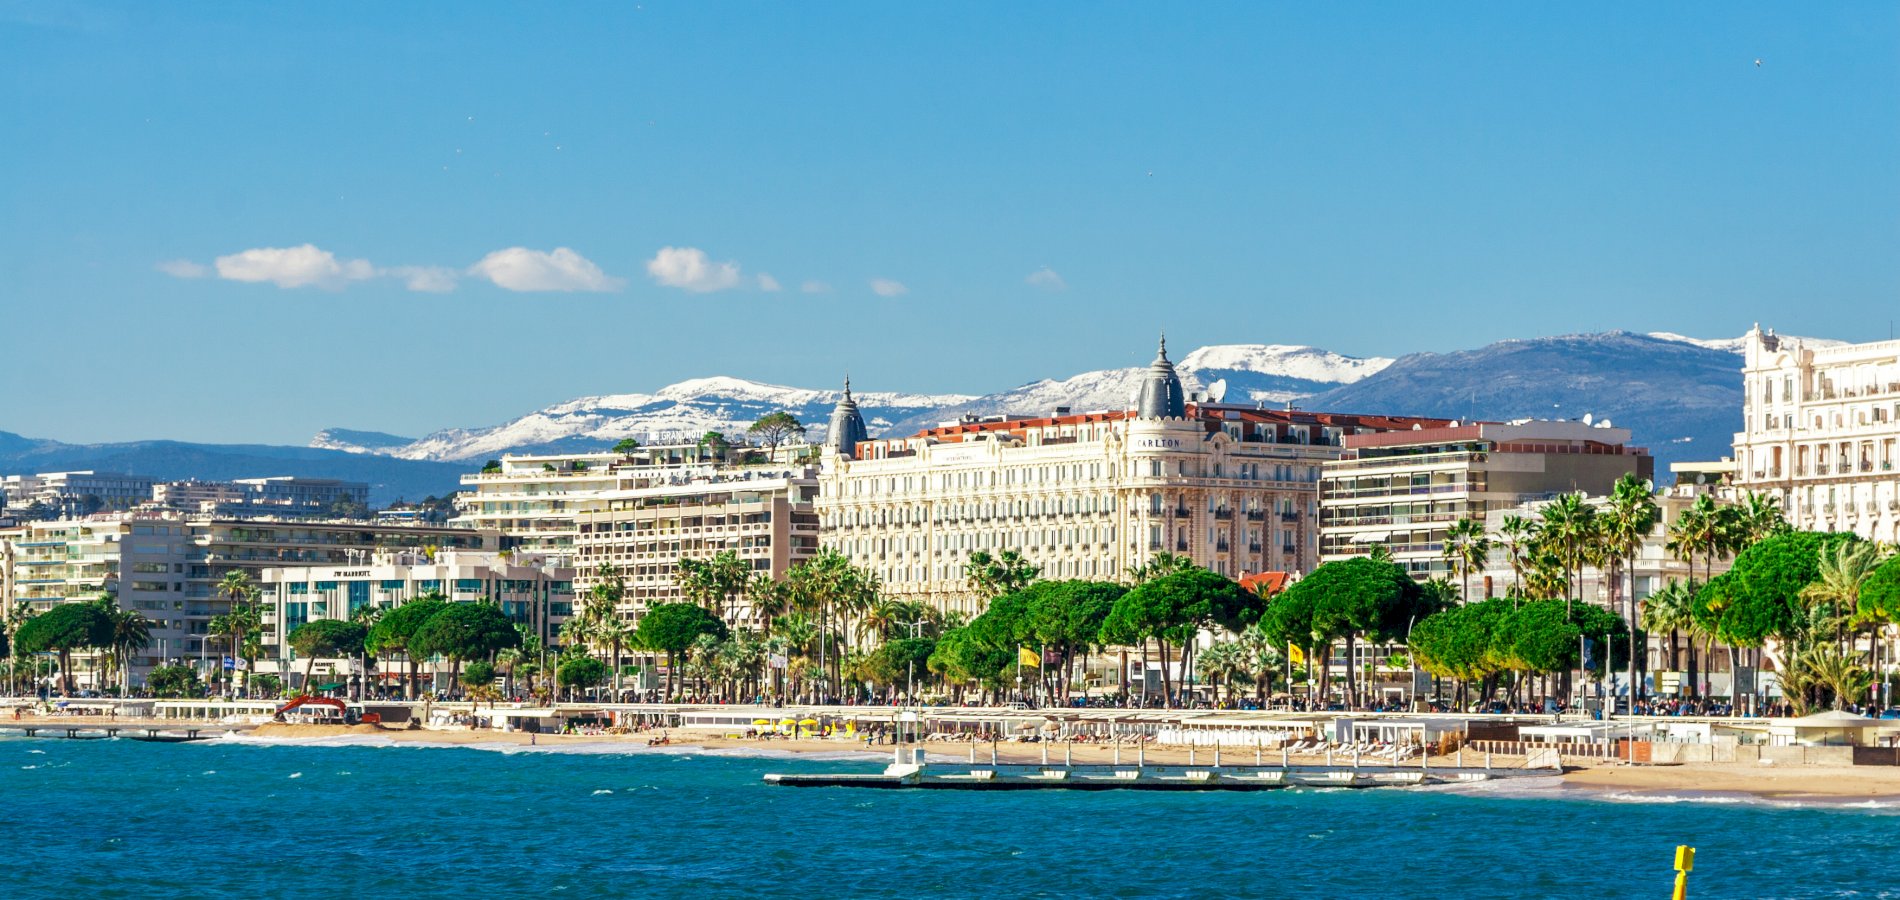 Ophorus Tours - A Private Shore Excursion From Nice to Cannes, Antibes & Juan Les Pins